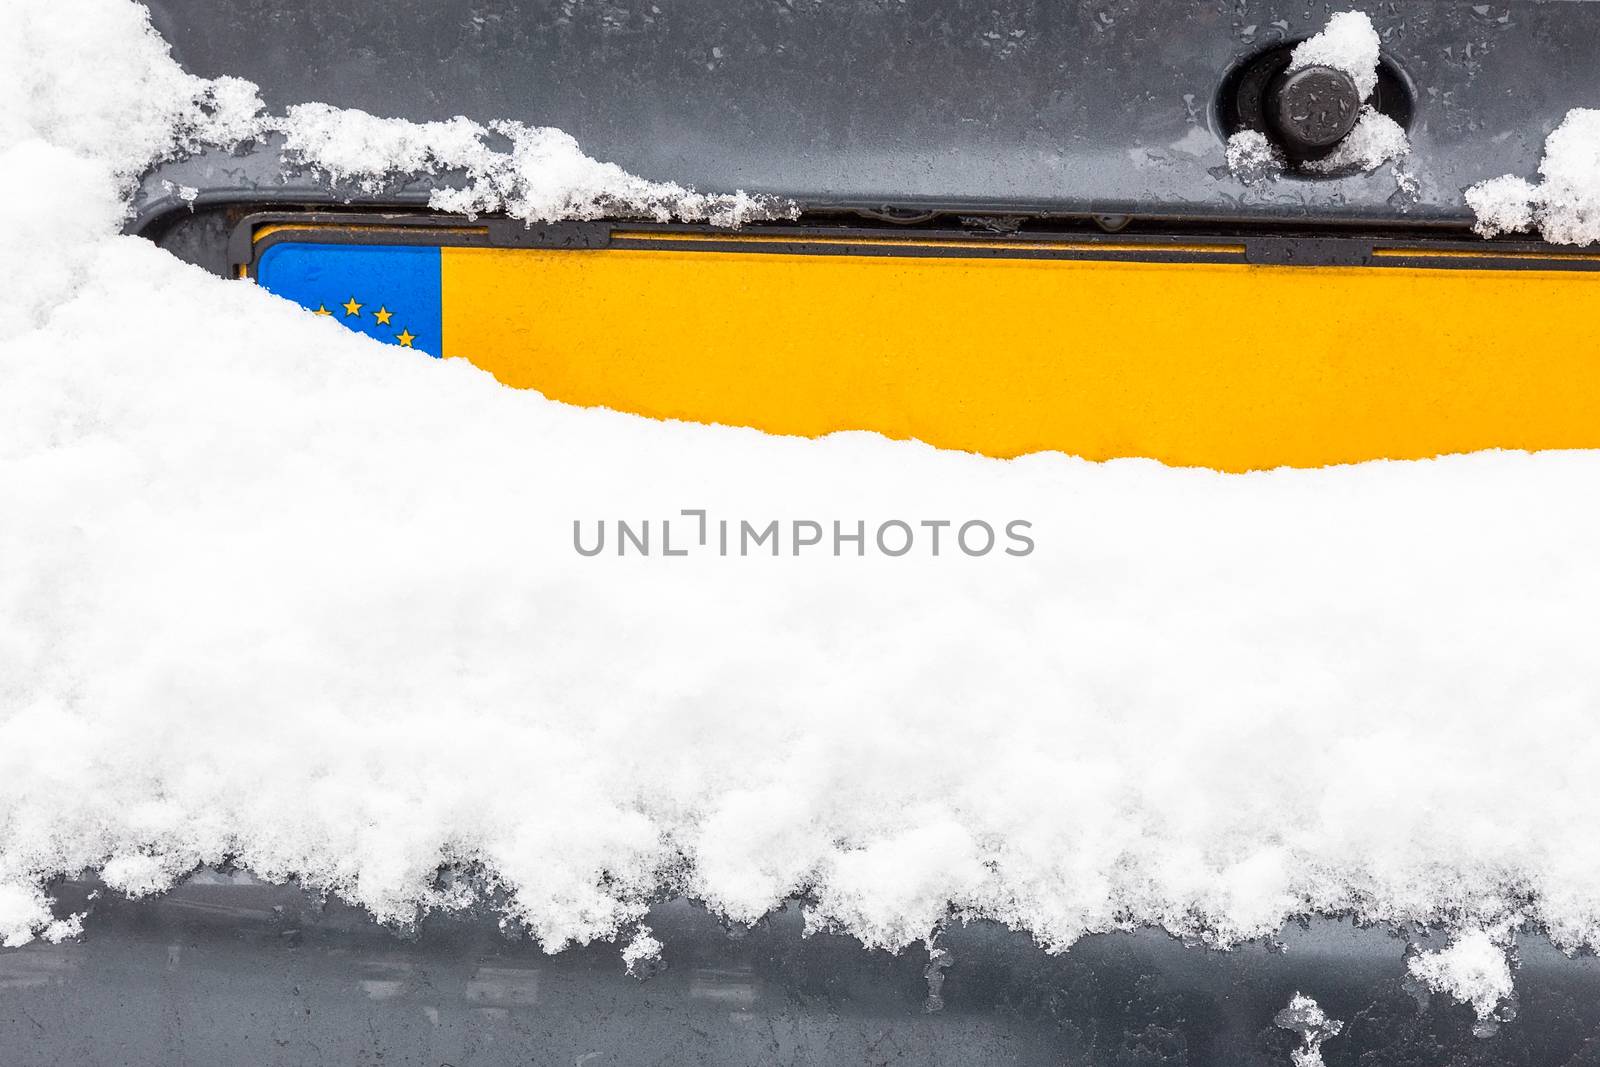 Dutch car license plate with snow in winter season